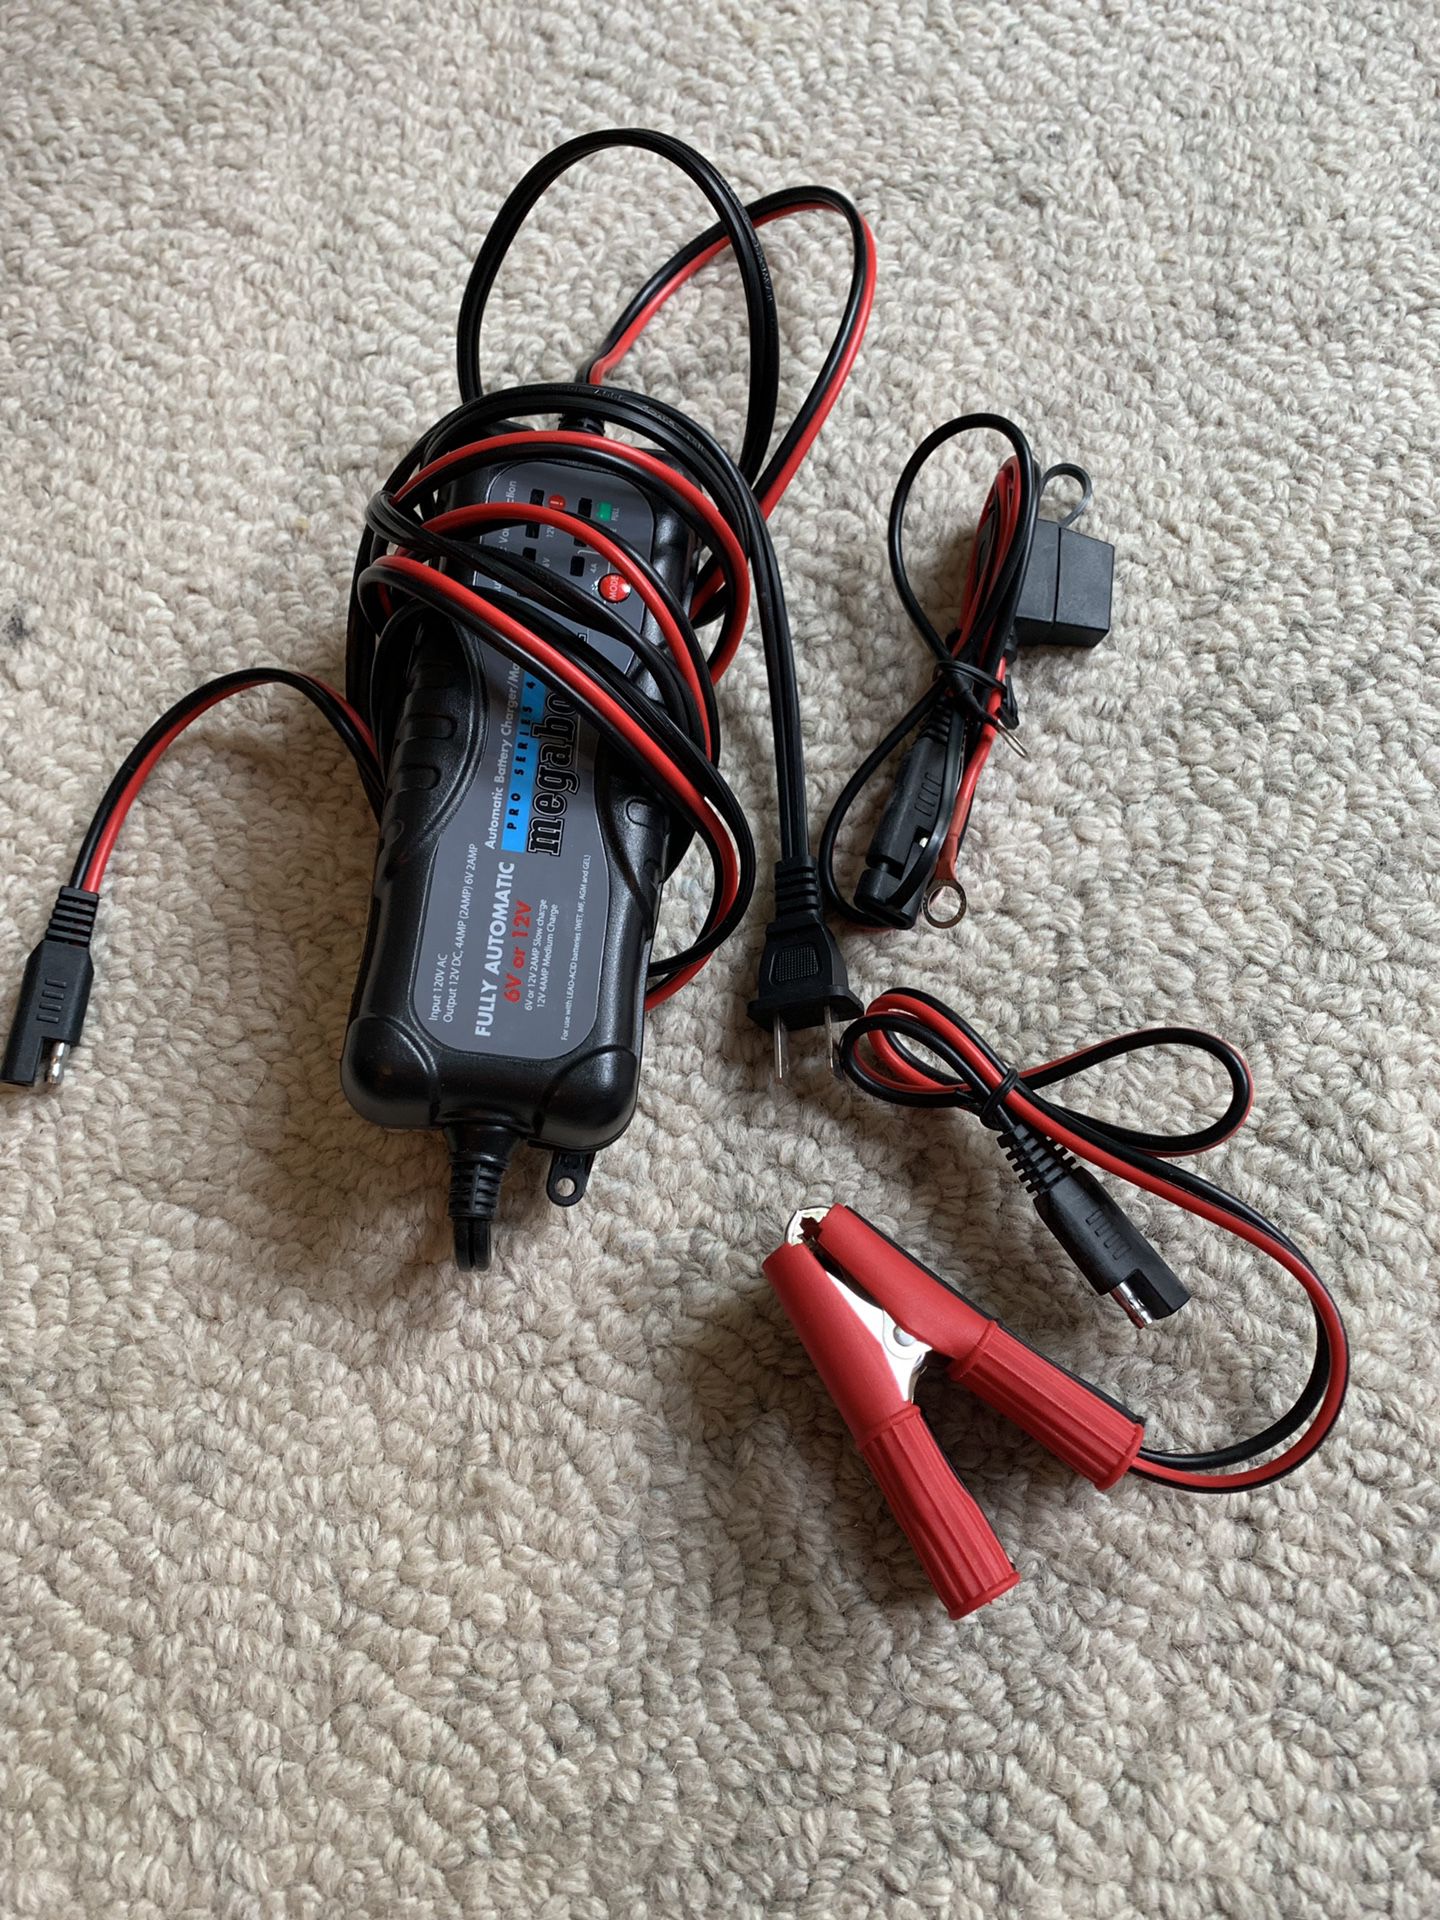 Megaboost Pro Series 4000 Charger And Maintainer